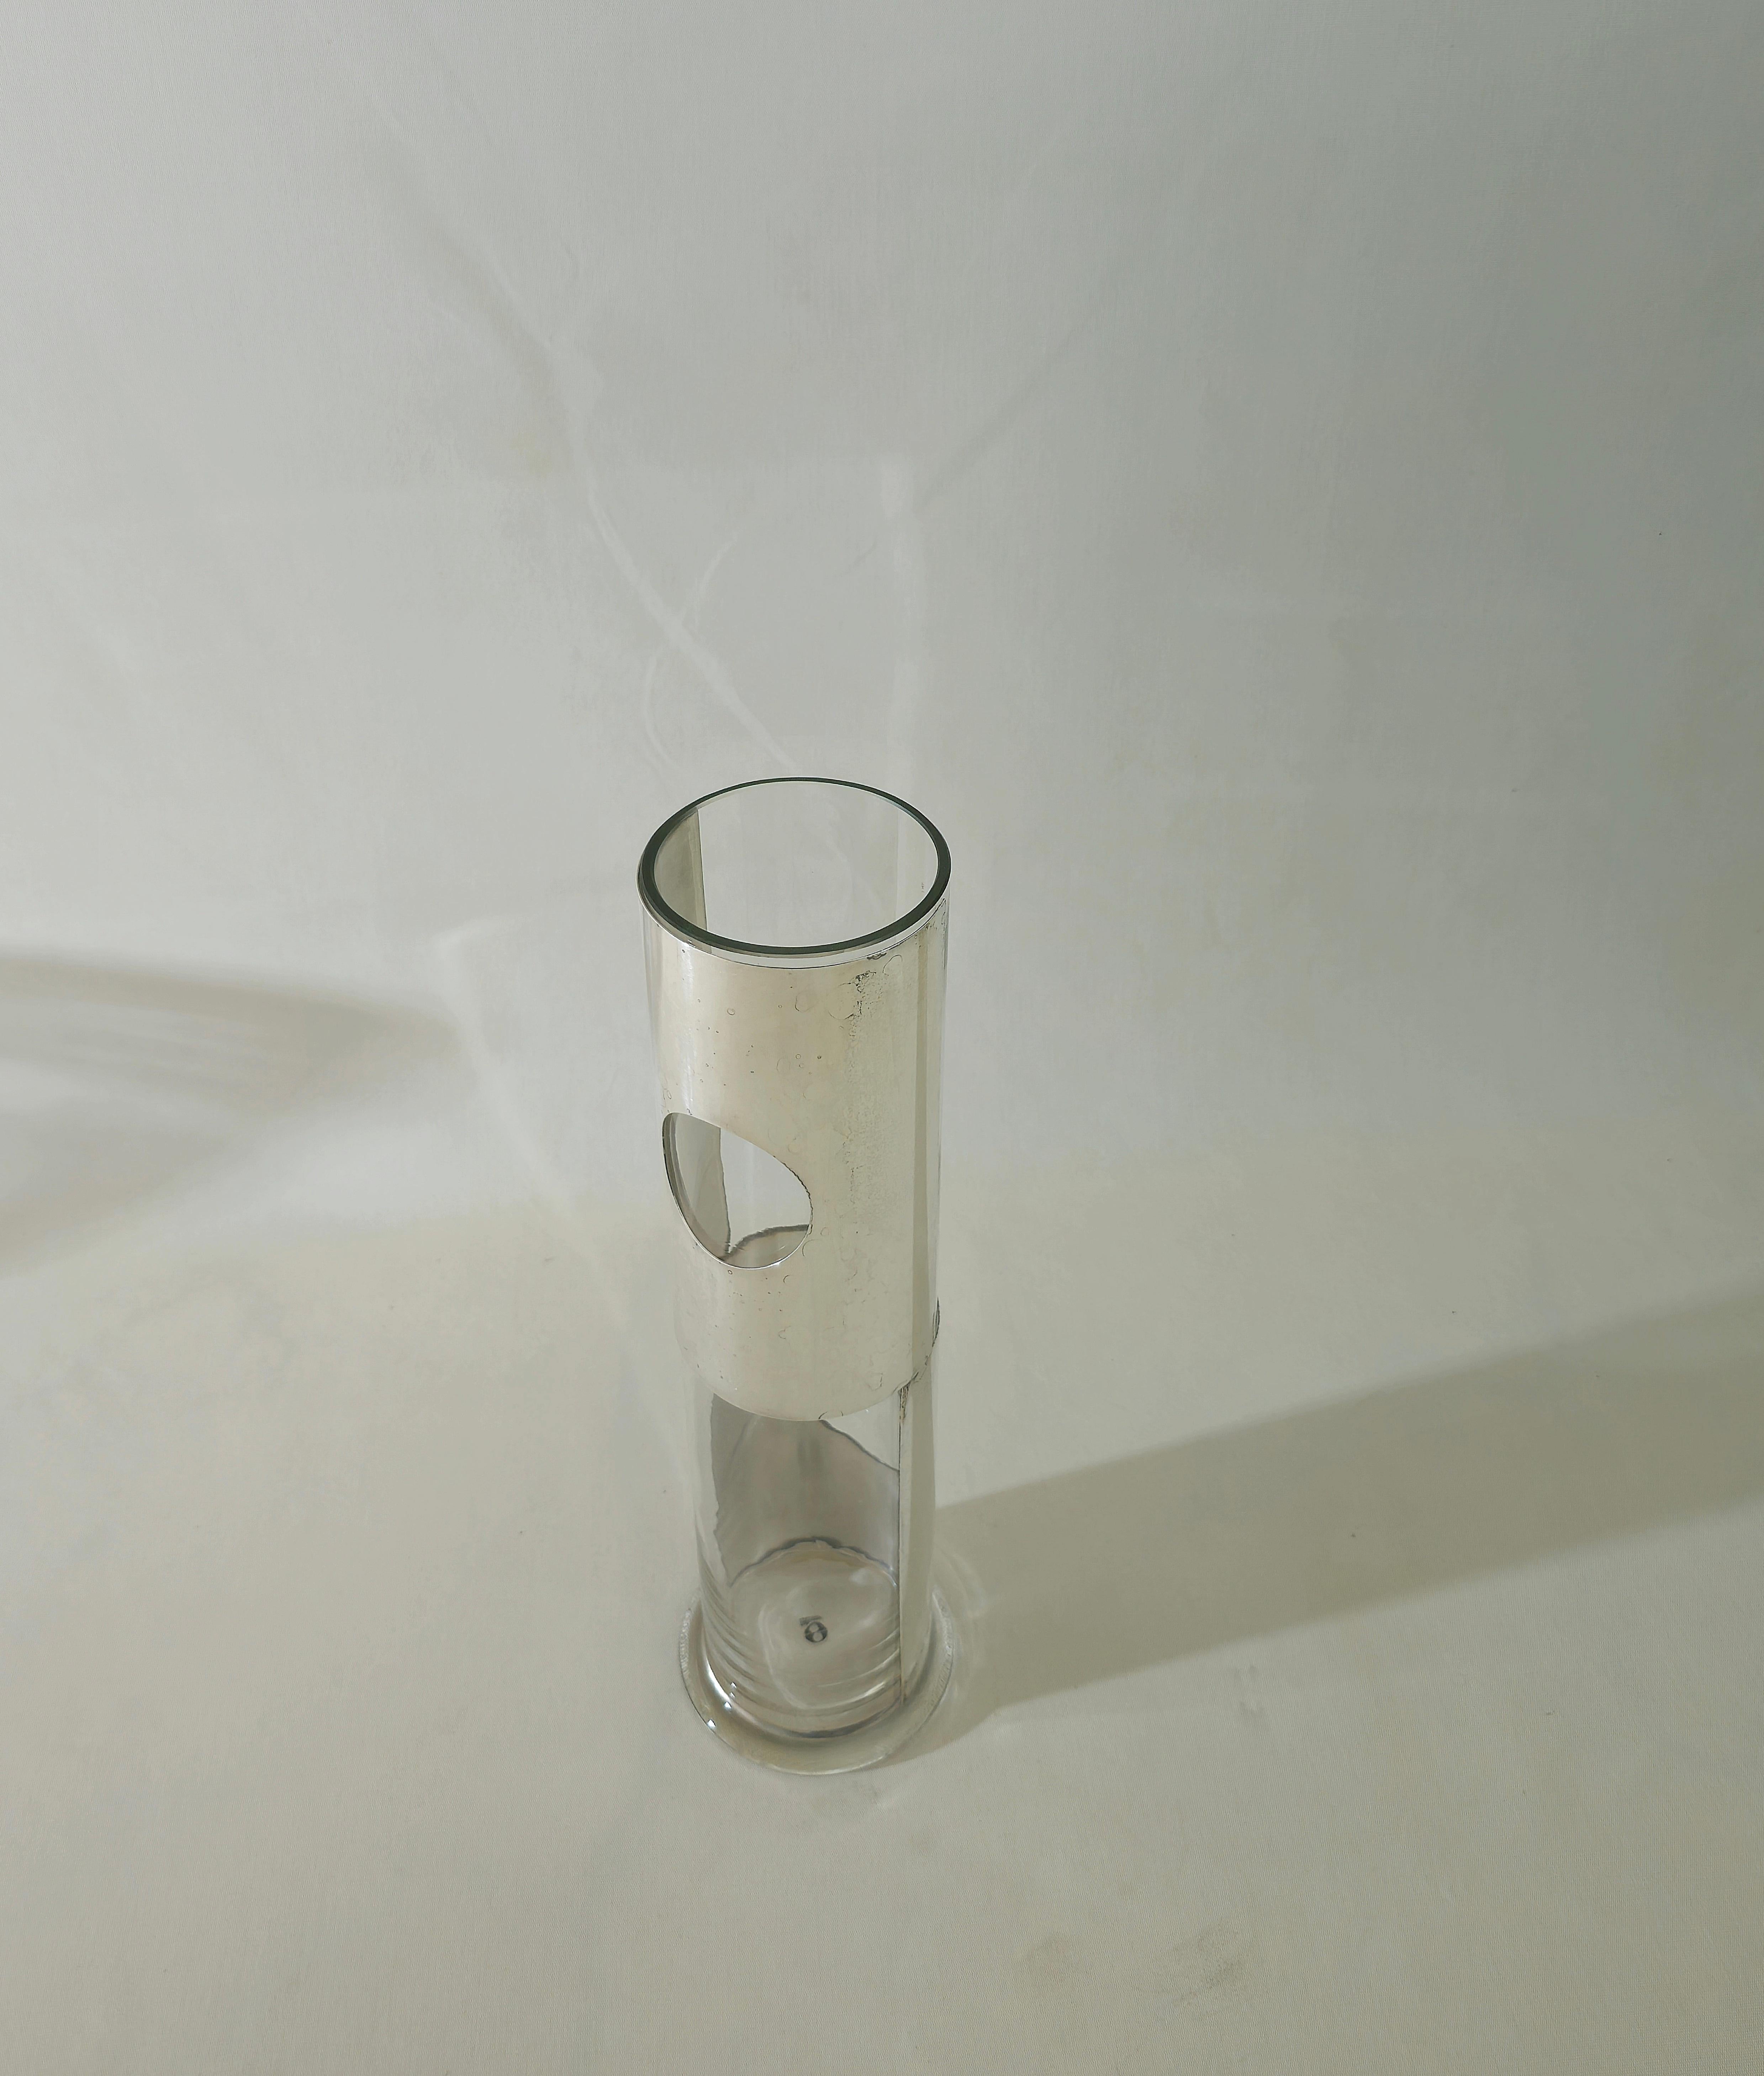 Glass and silver metal vase by Lino Sabattini, 1970s Design Italy Midcentury For Sale 2